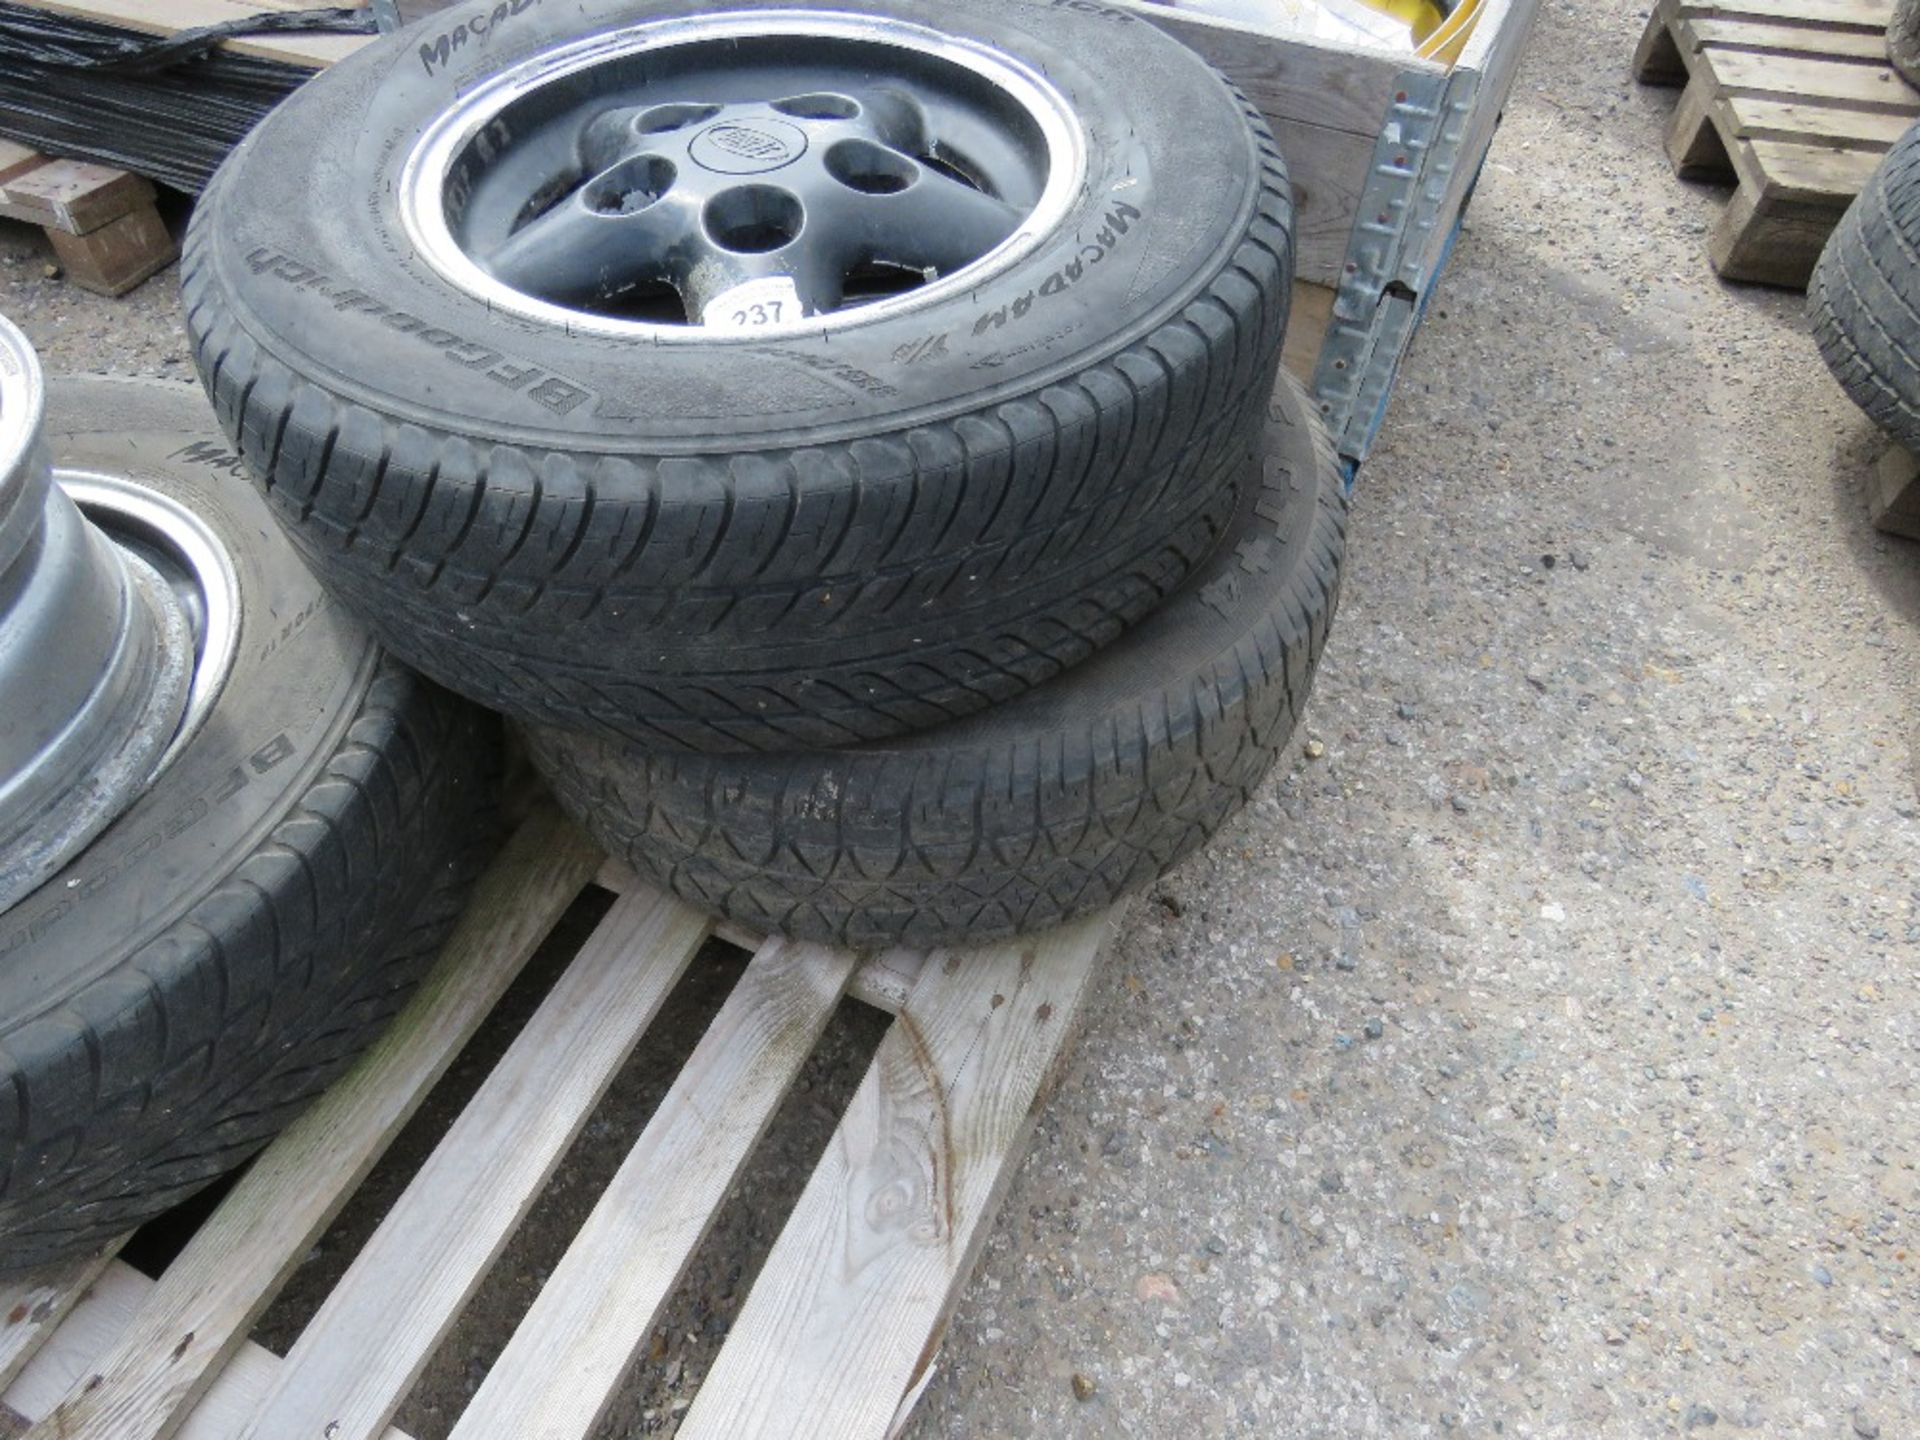 LANDROVER 16" WHEELS AND TYRES/RIMS. (4 X RIMS WITH 3 TYRES) - Image 2 of 3